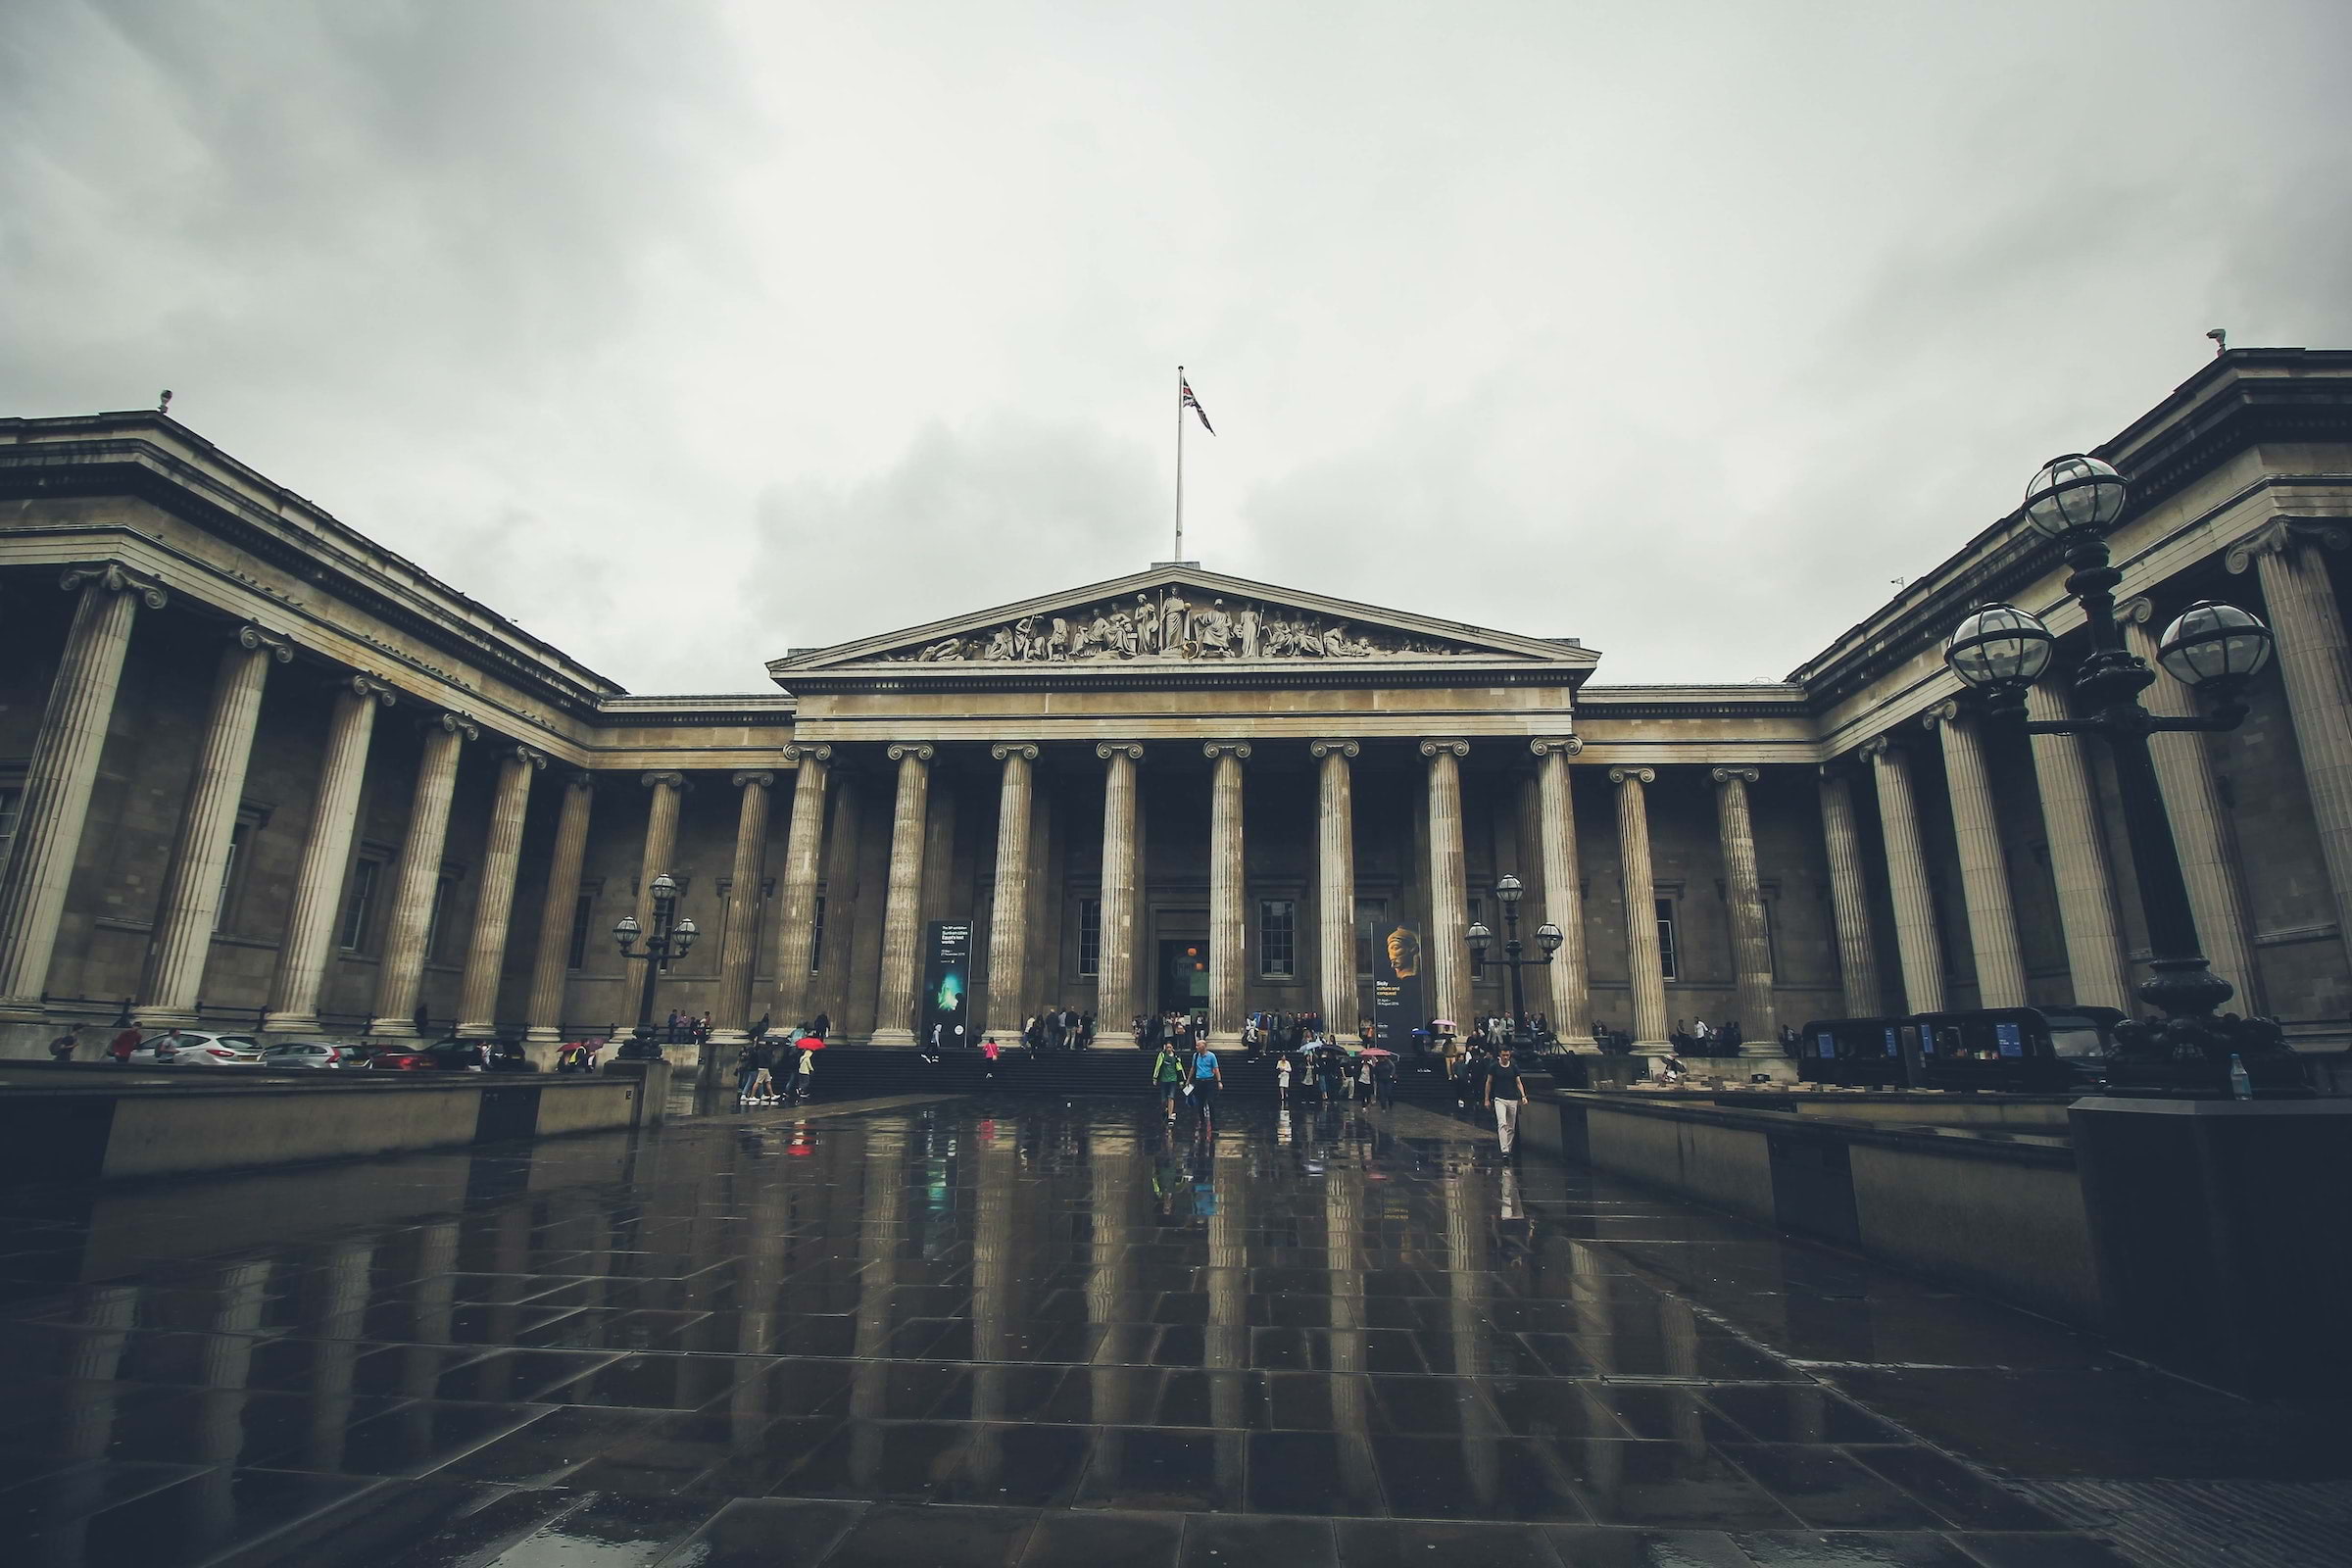 Things to do on rainy days in London